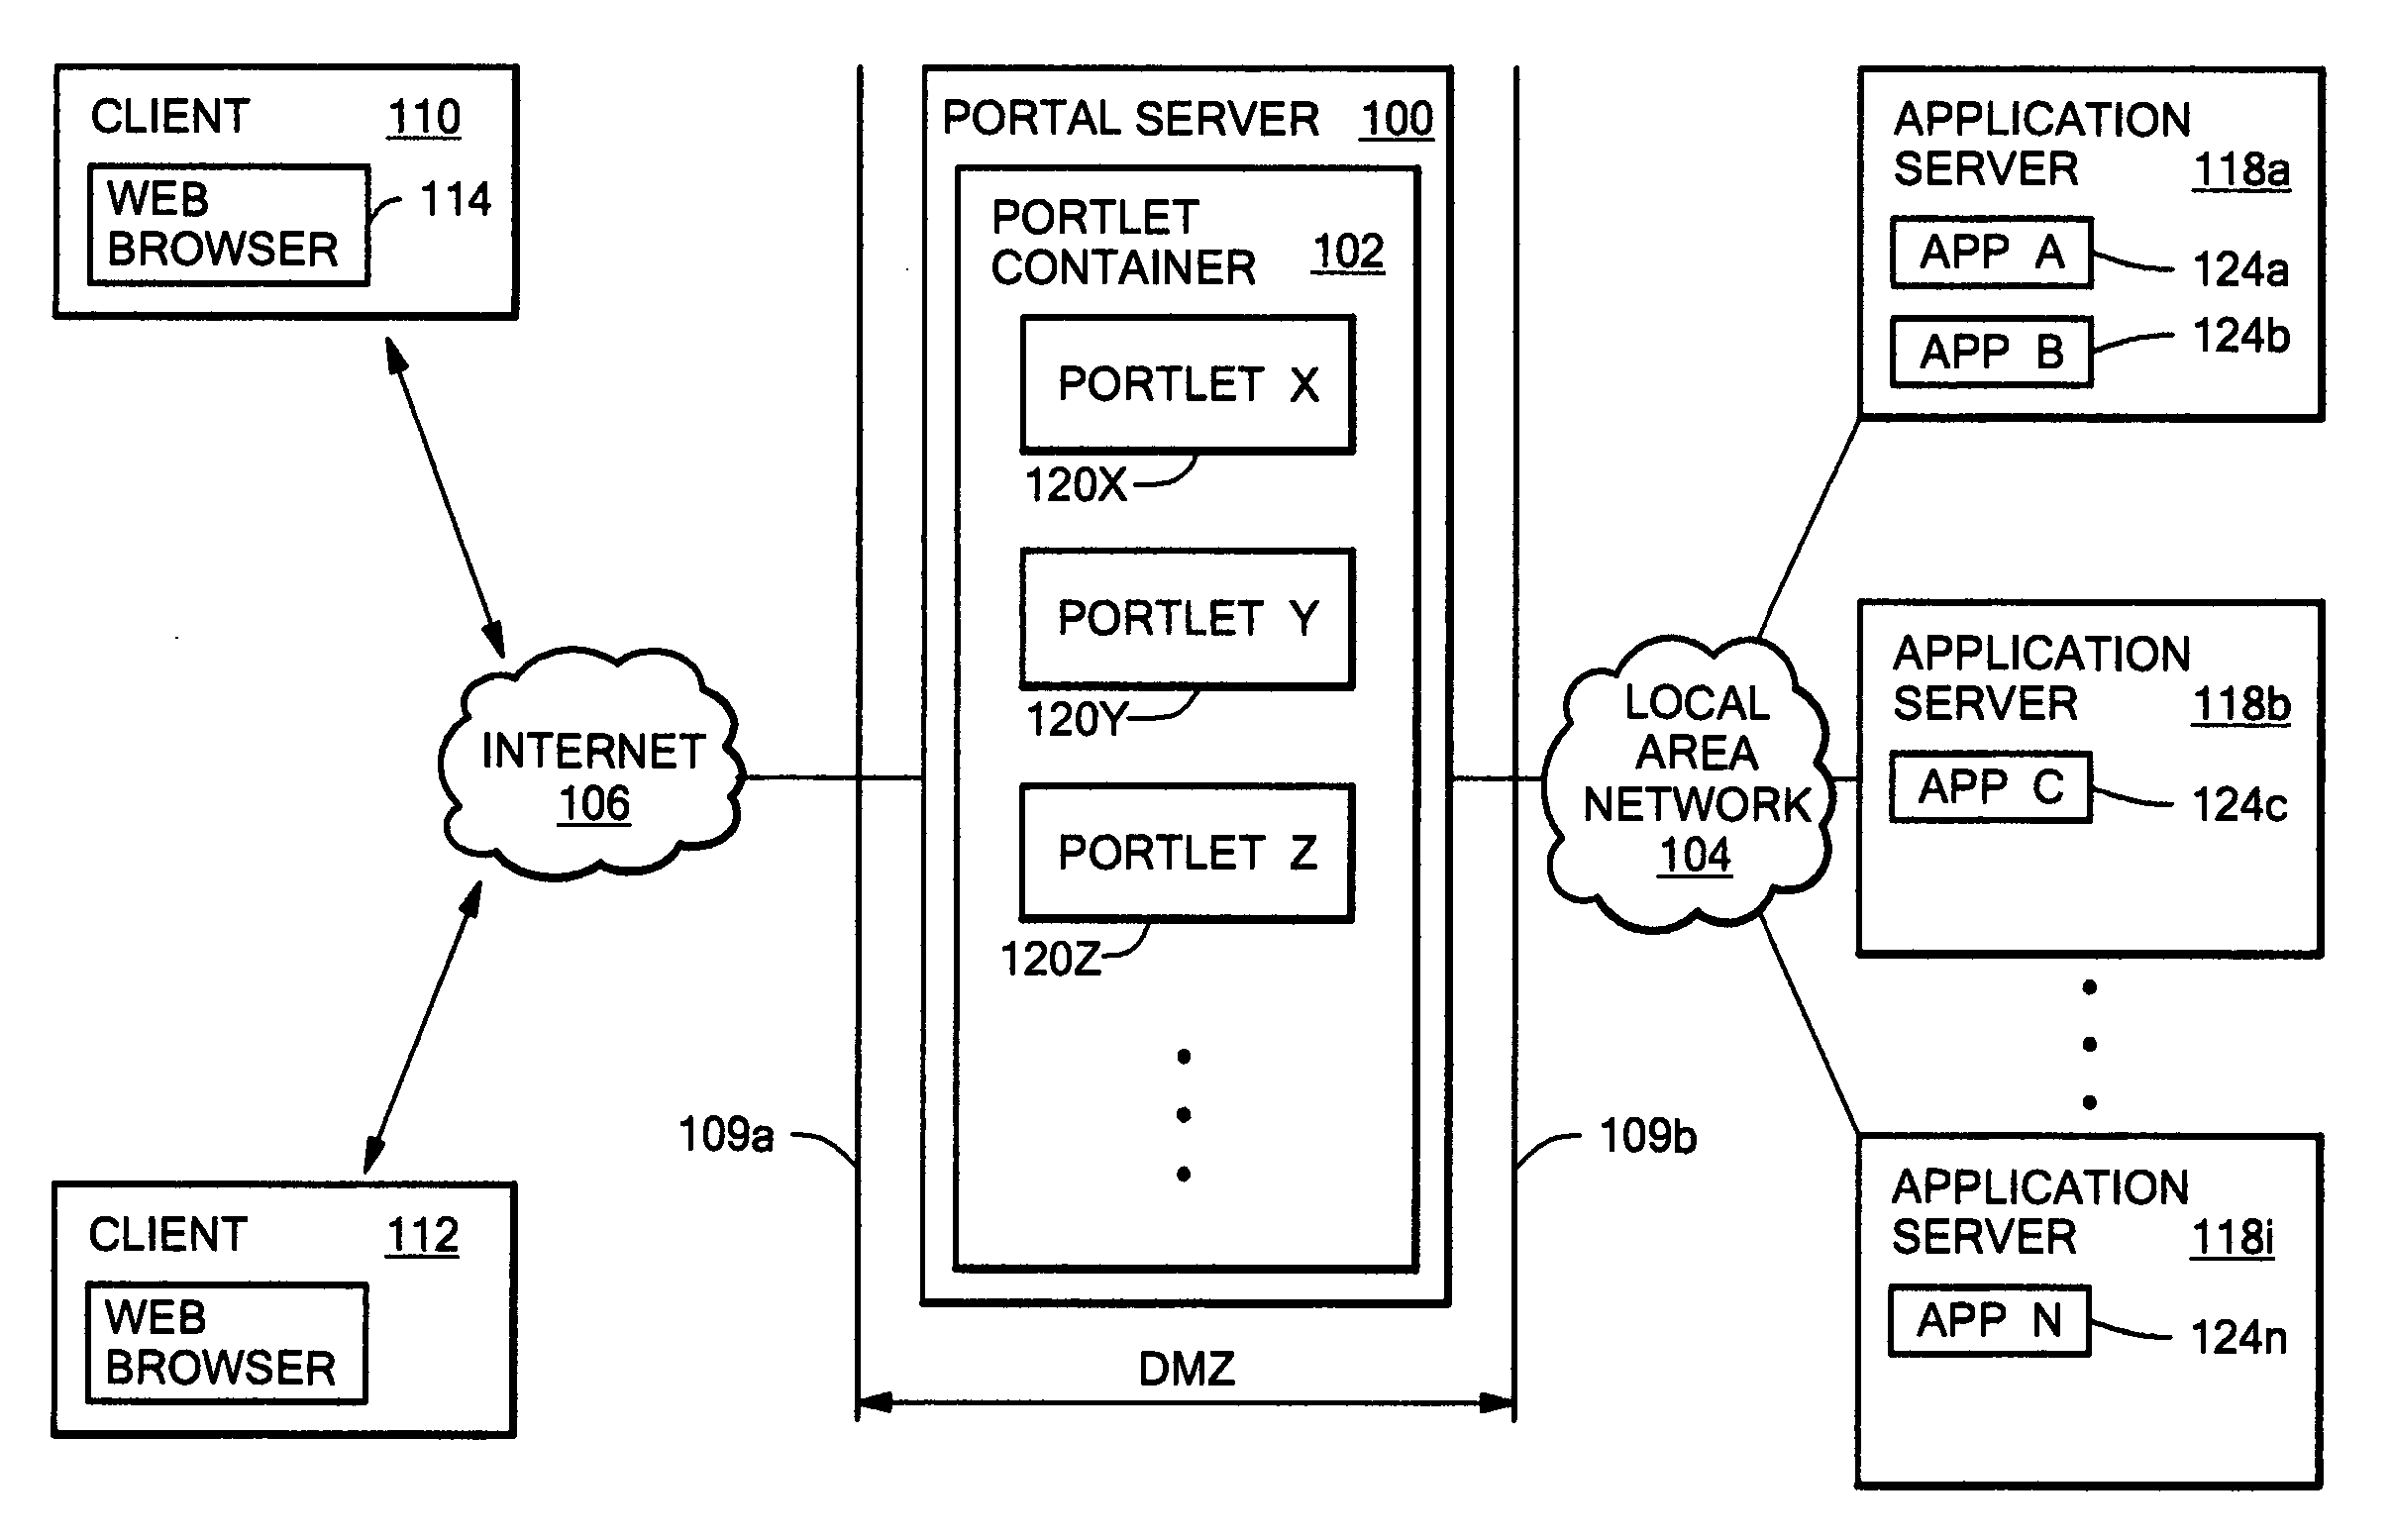 Reverse proxy portlet with rule-based, instance level configuration